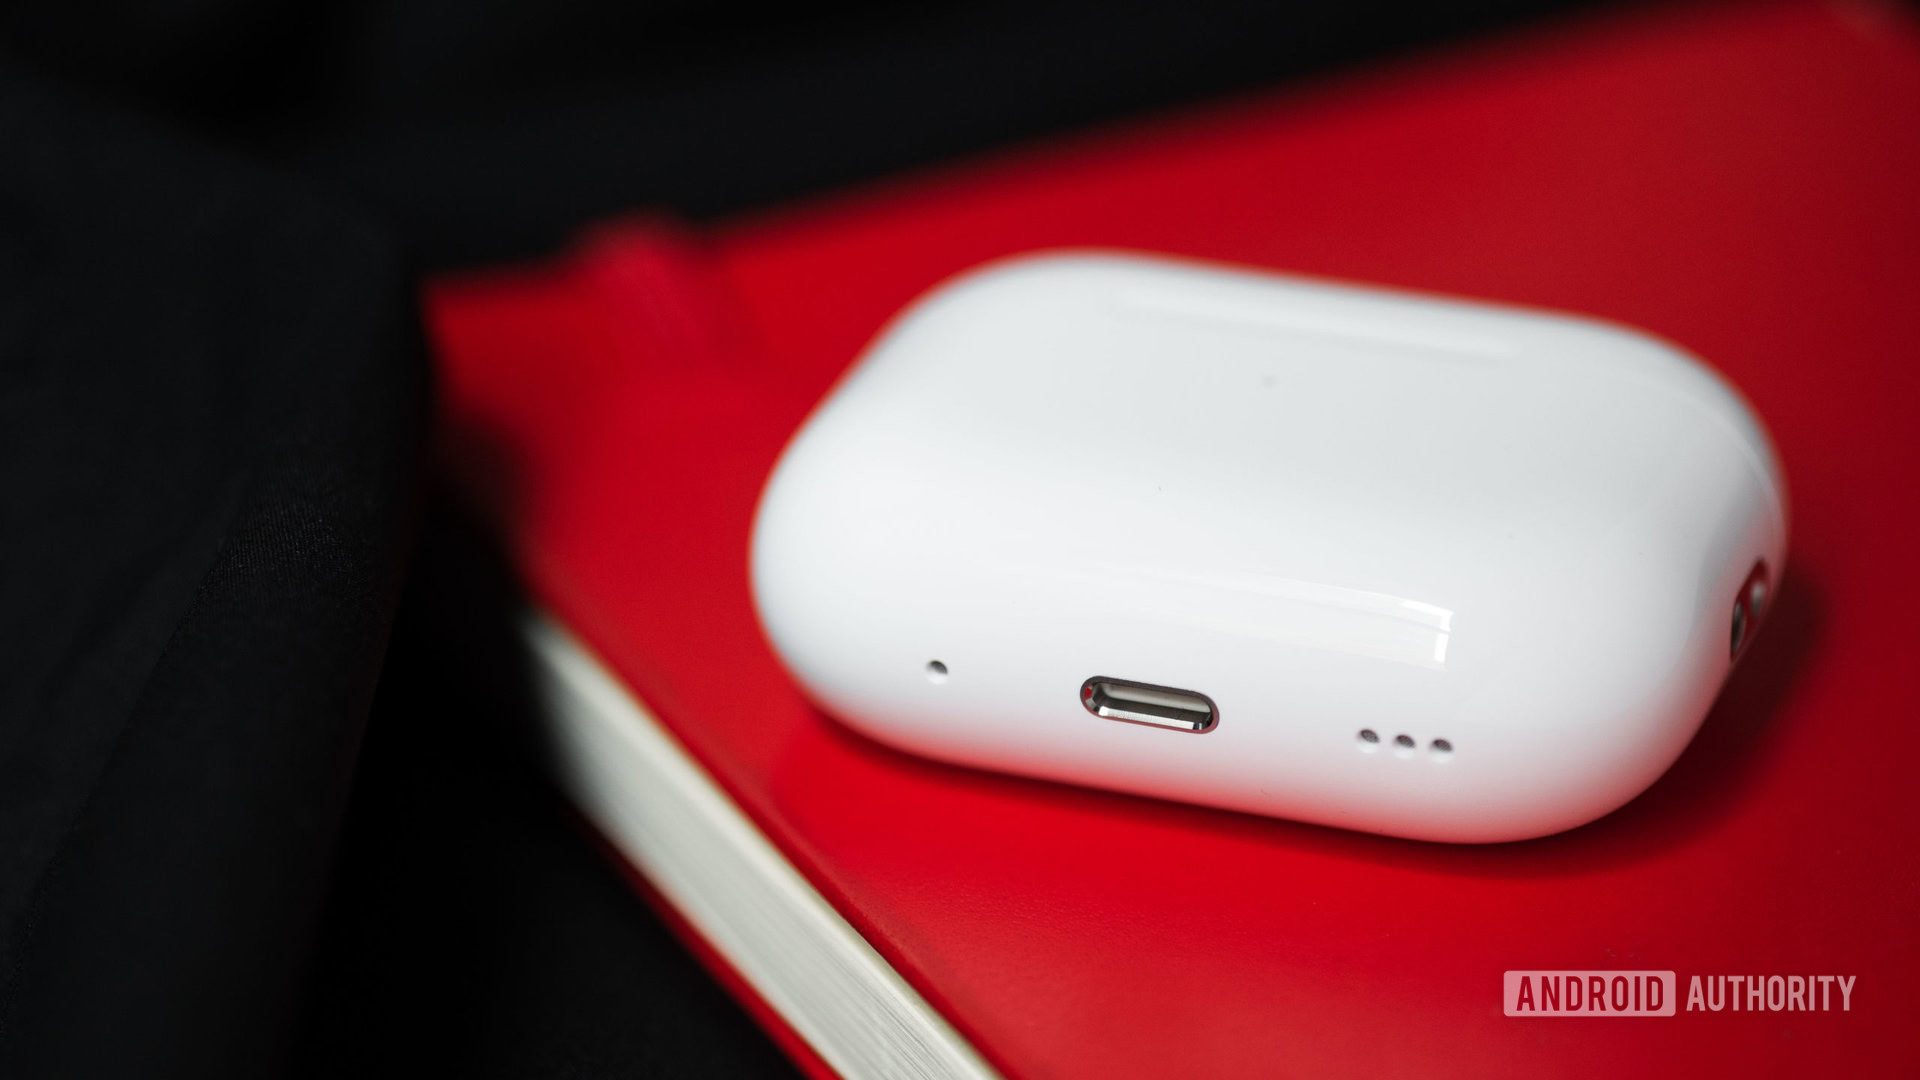 The Apple AirPods Pro (2nd generation) charging case with its Lightning input and speaker.